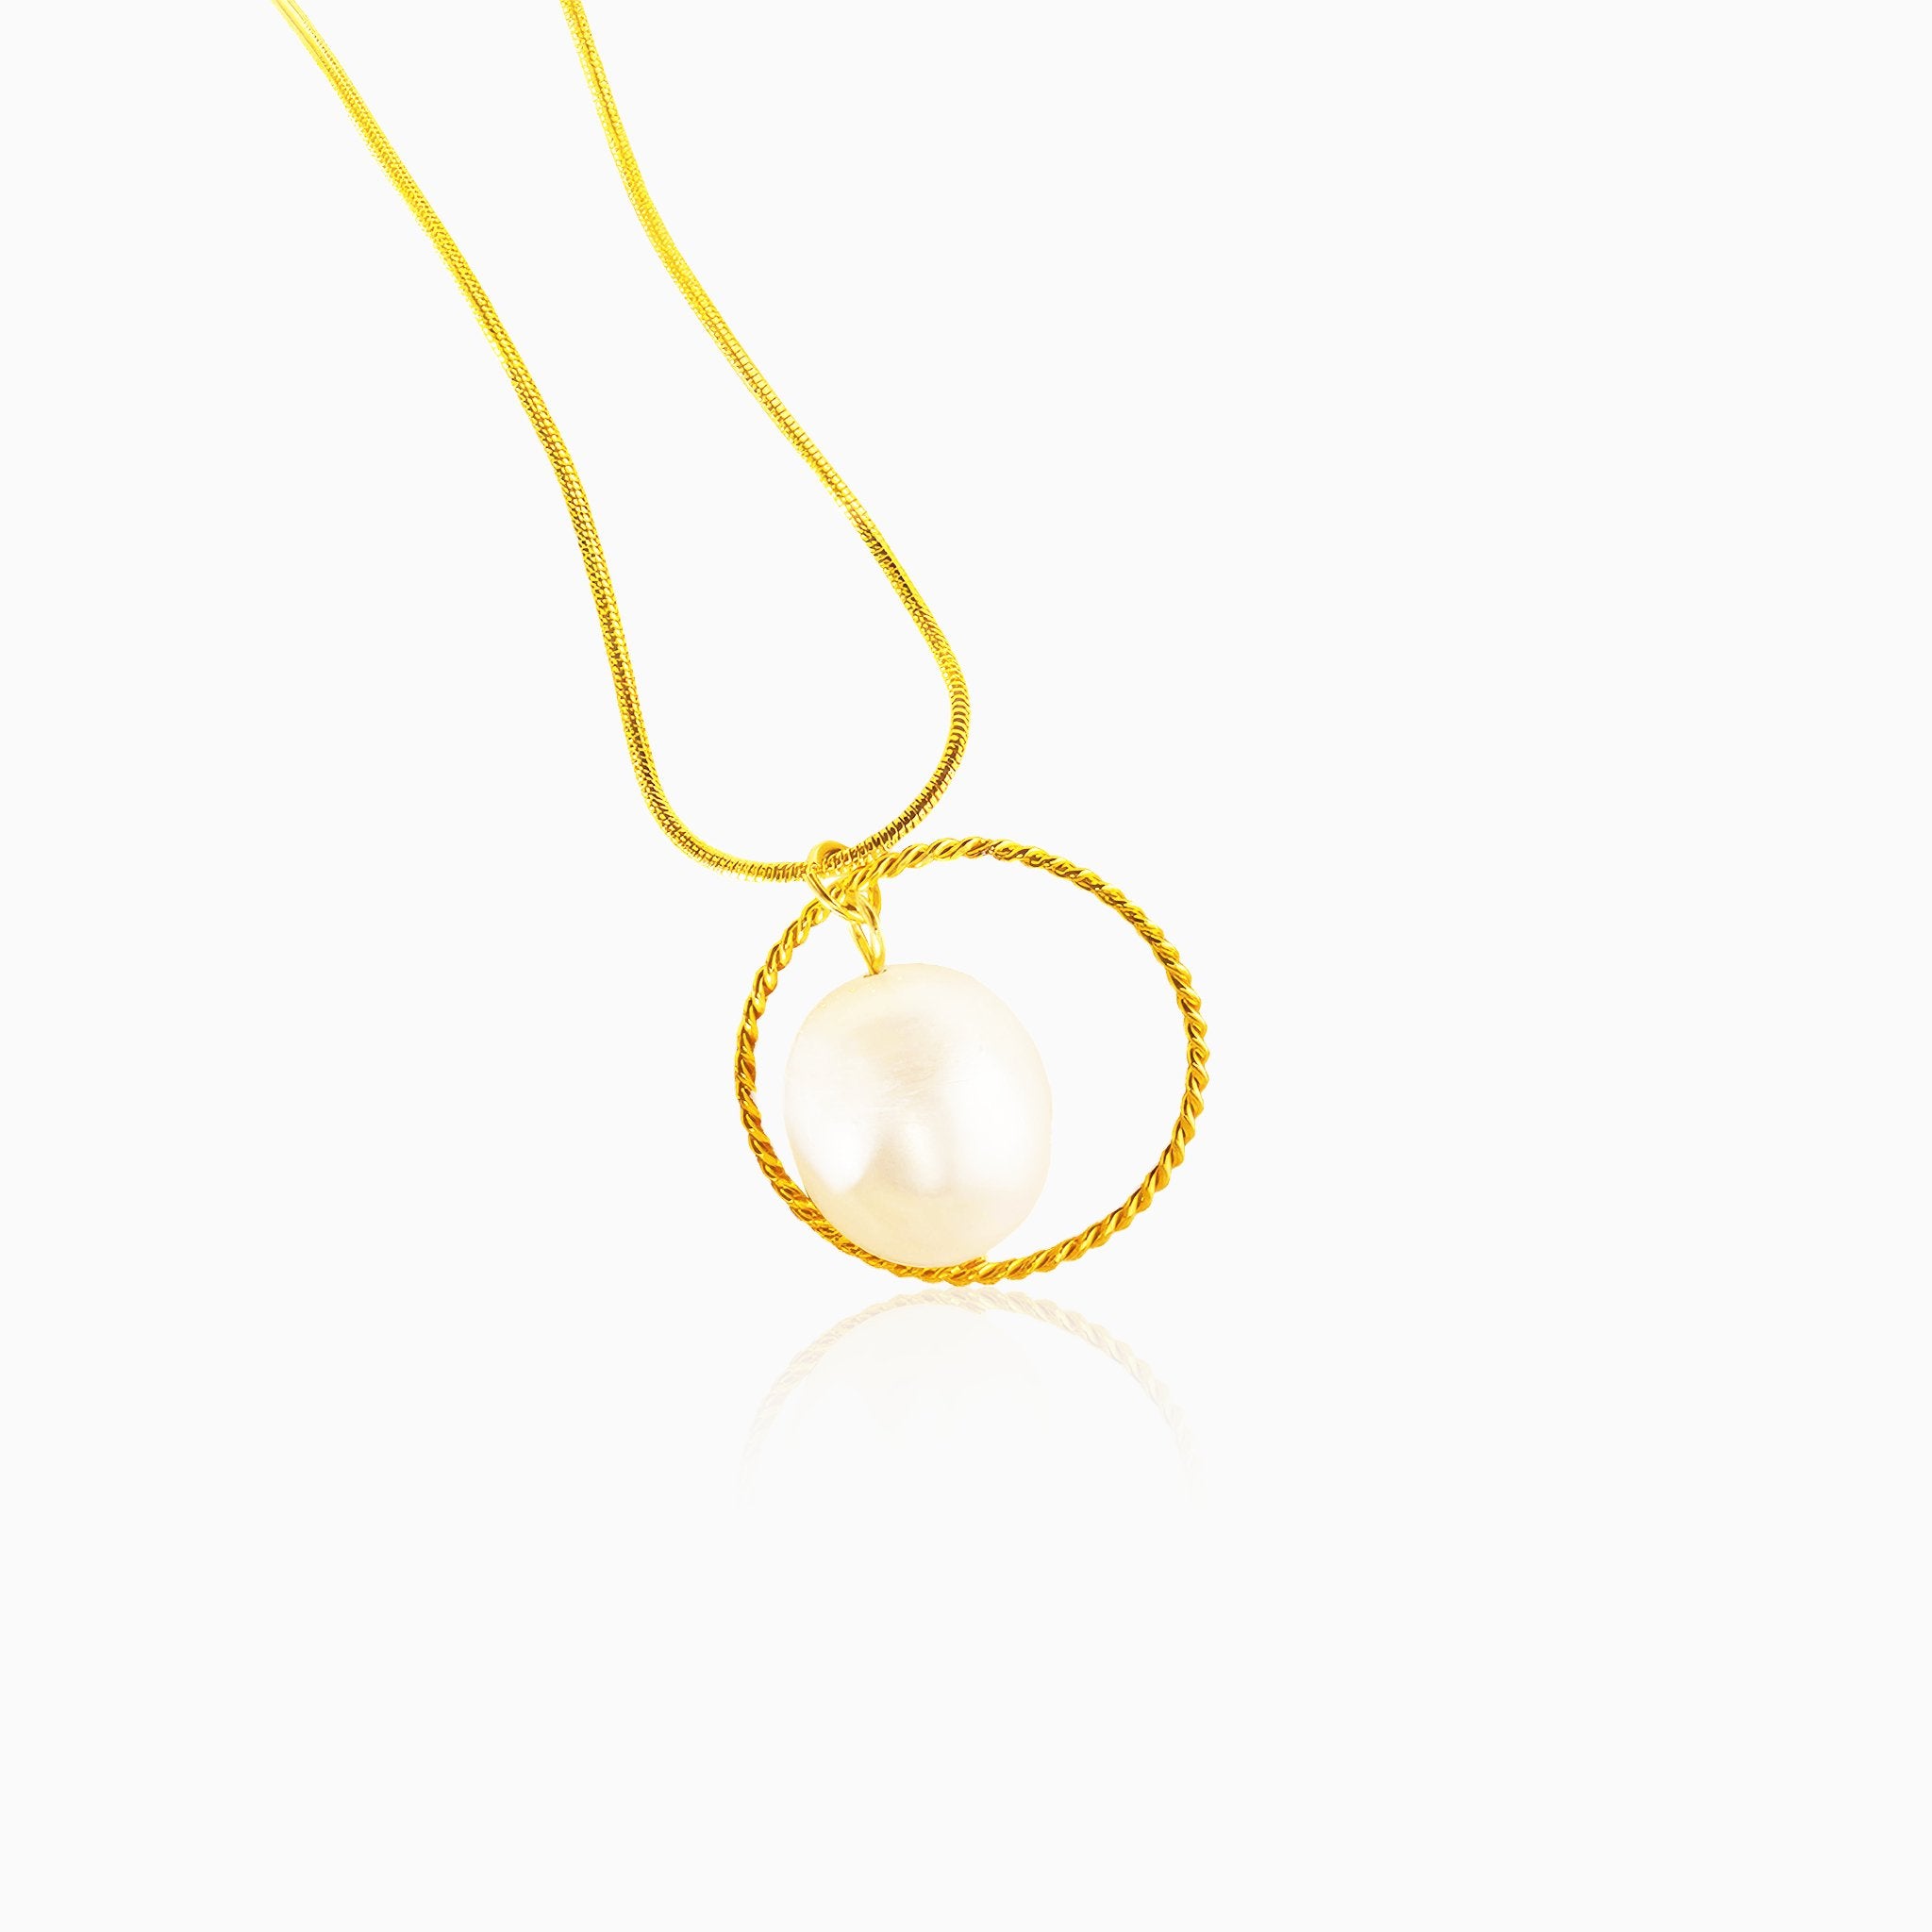 Necklace with Freshwater Pearl Pendant - Nobbier - Necklace - 18K Gold And Titanium PVD Coated Jewelry